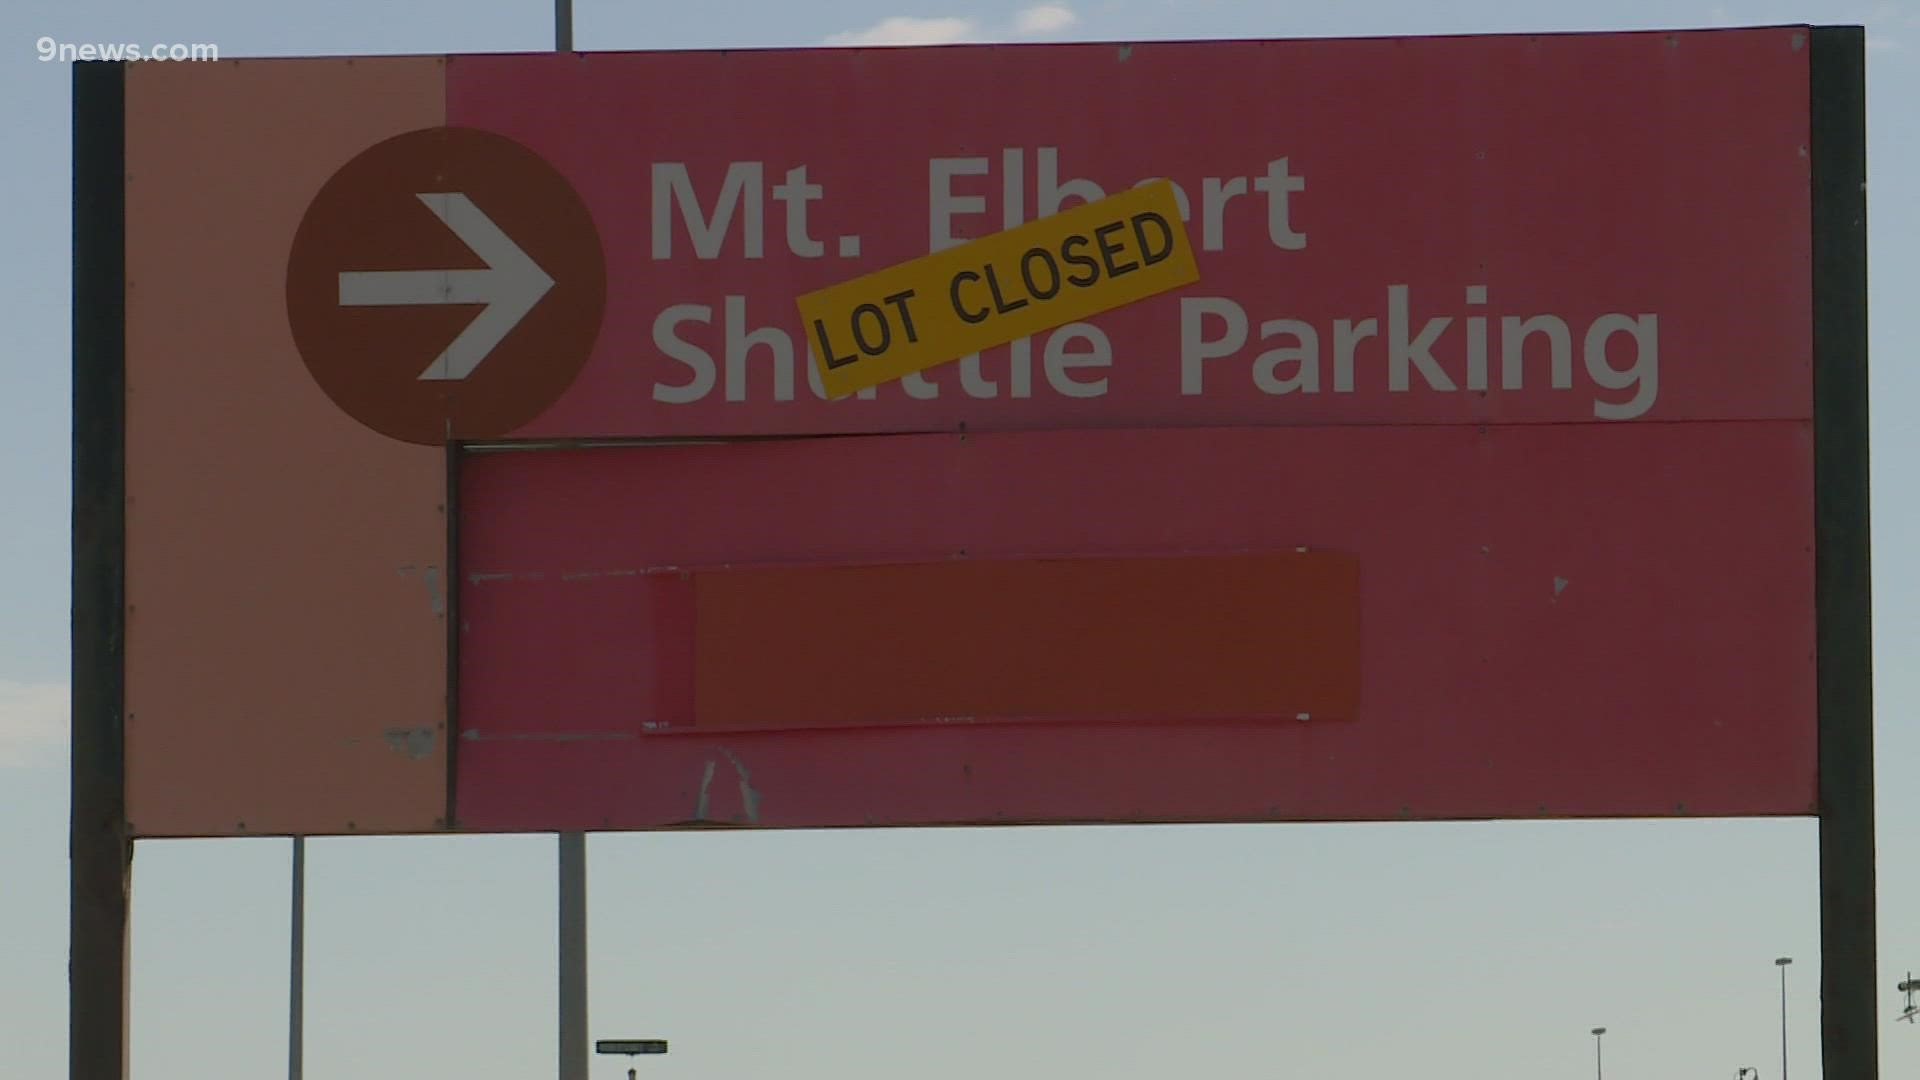 The Mount Elbert and Pikes Peak shuttle lots closed in May 2020 when COVID infections peaked. DIA is having trouble replacing drivers to restart the service.